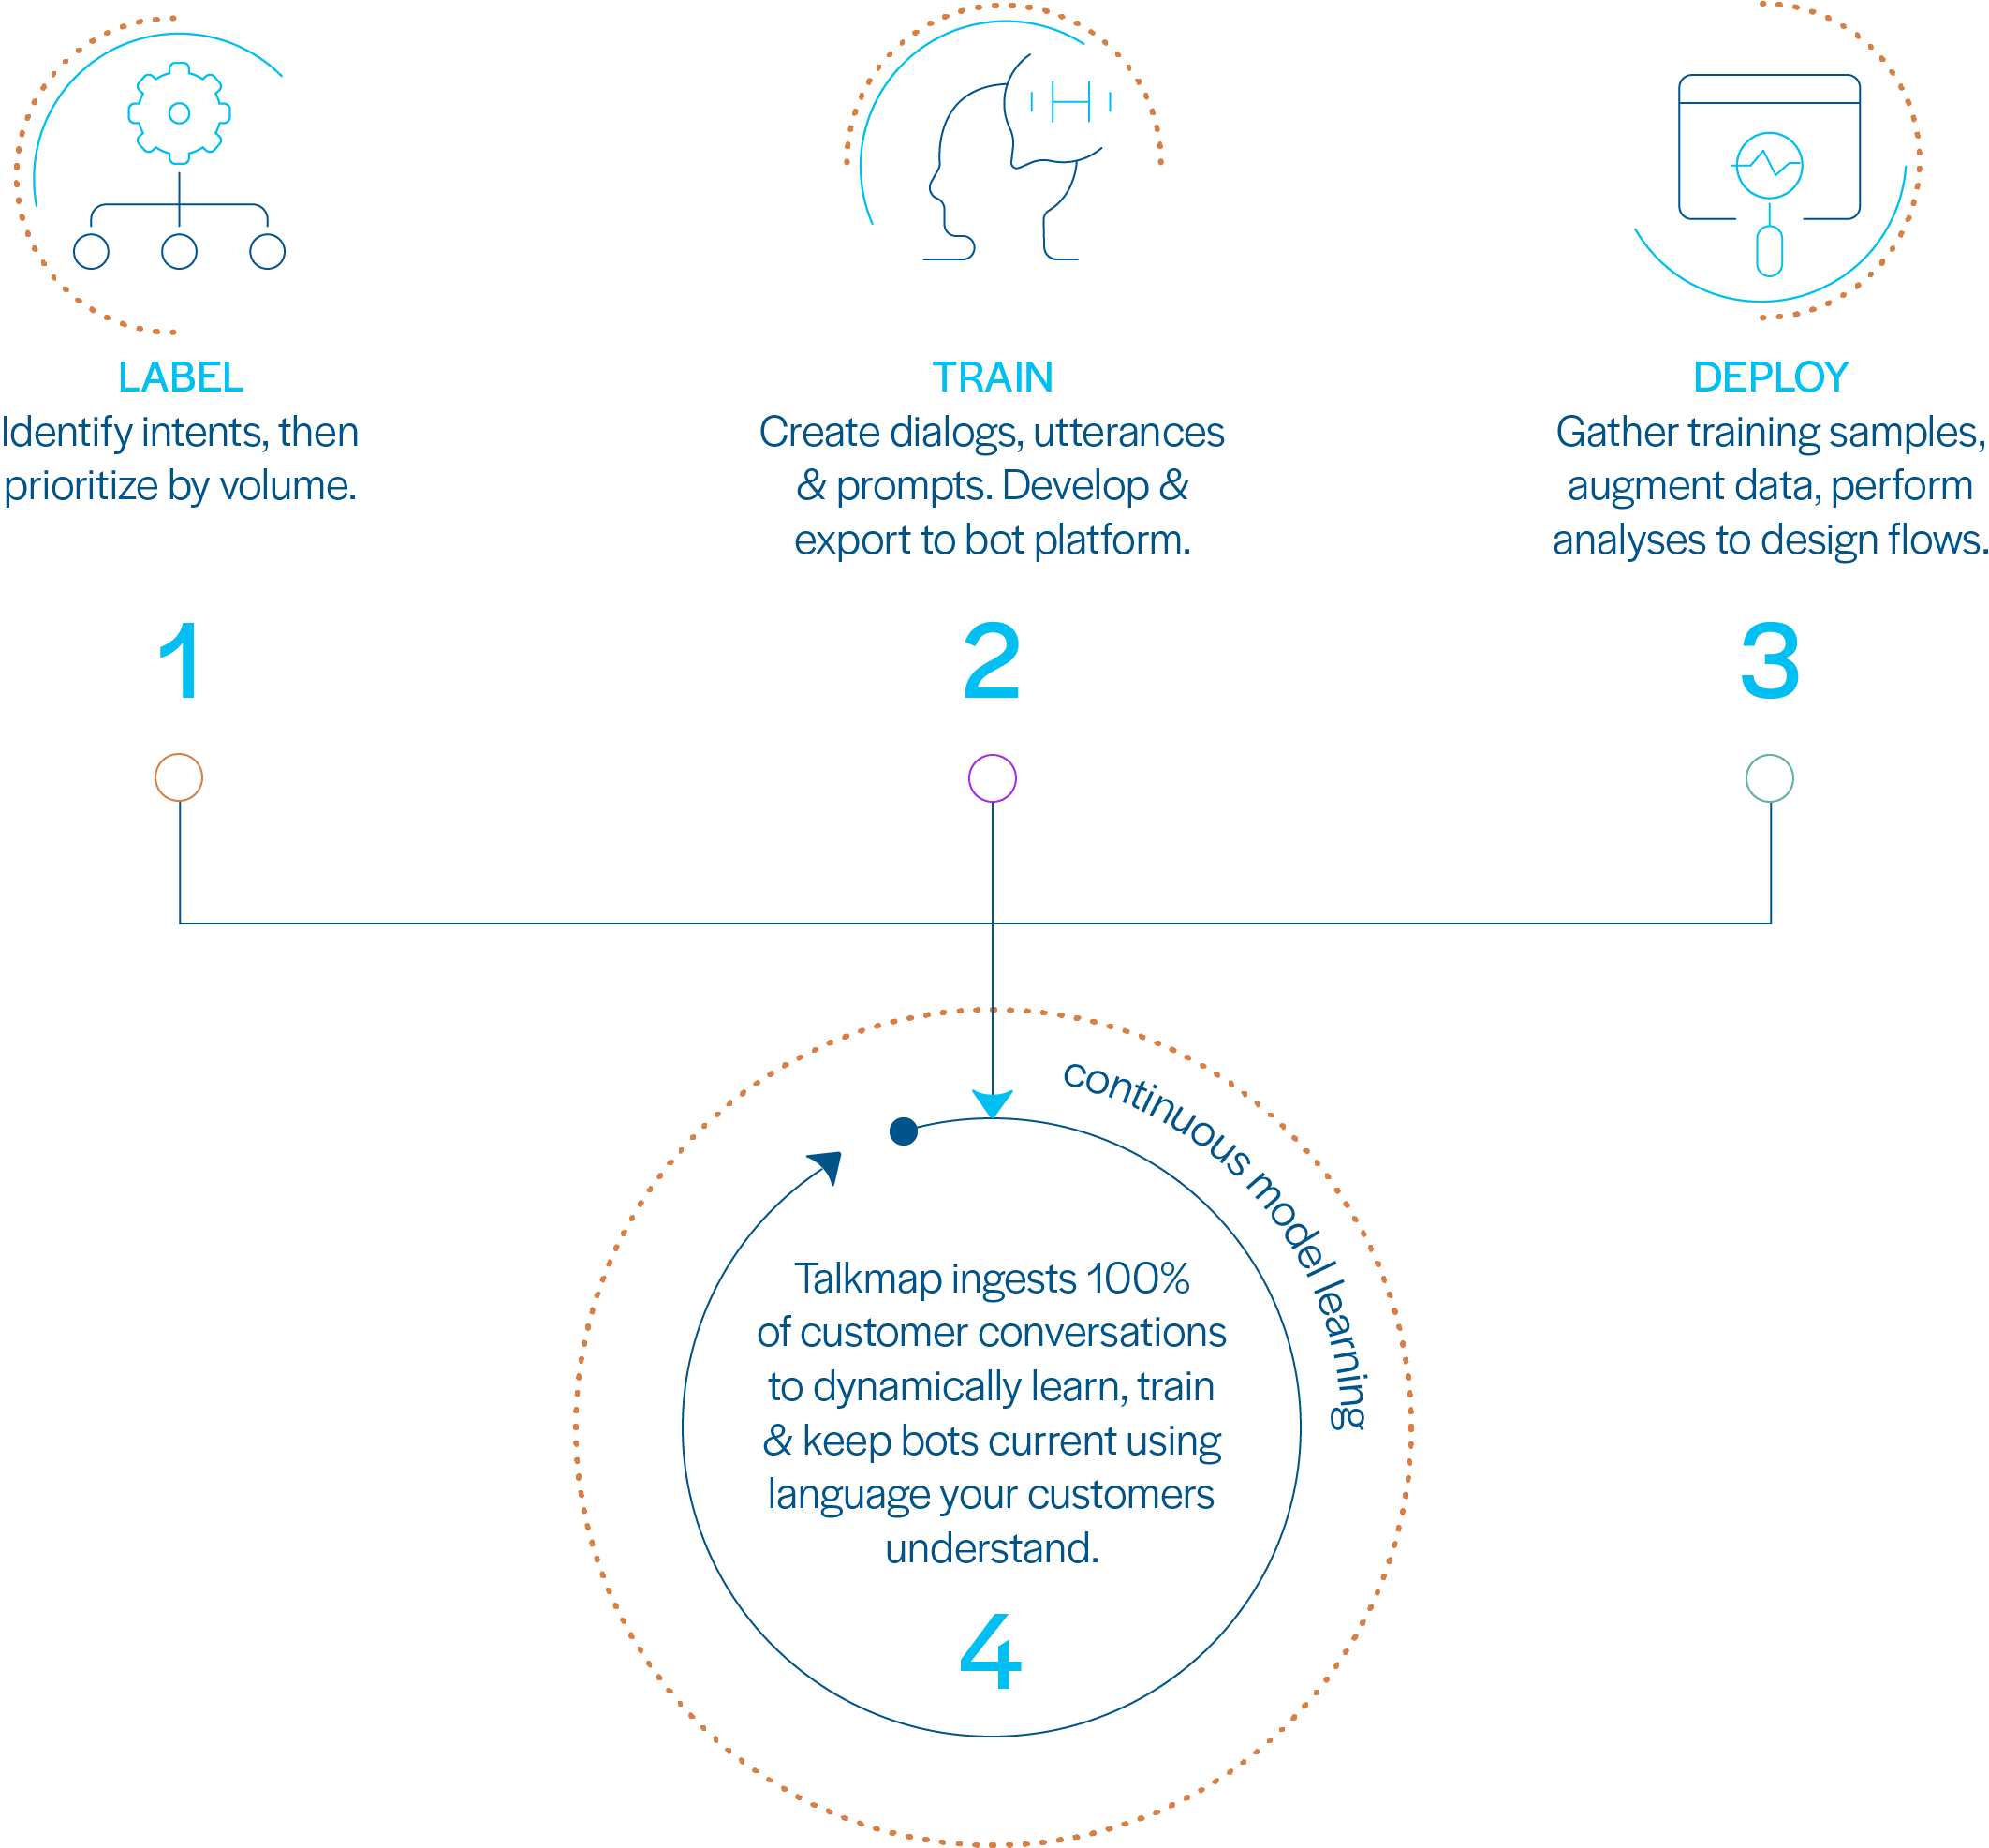 Process Infographic